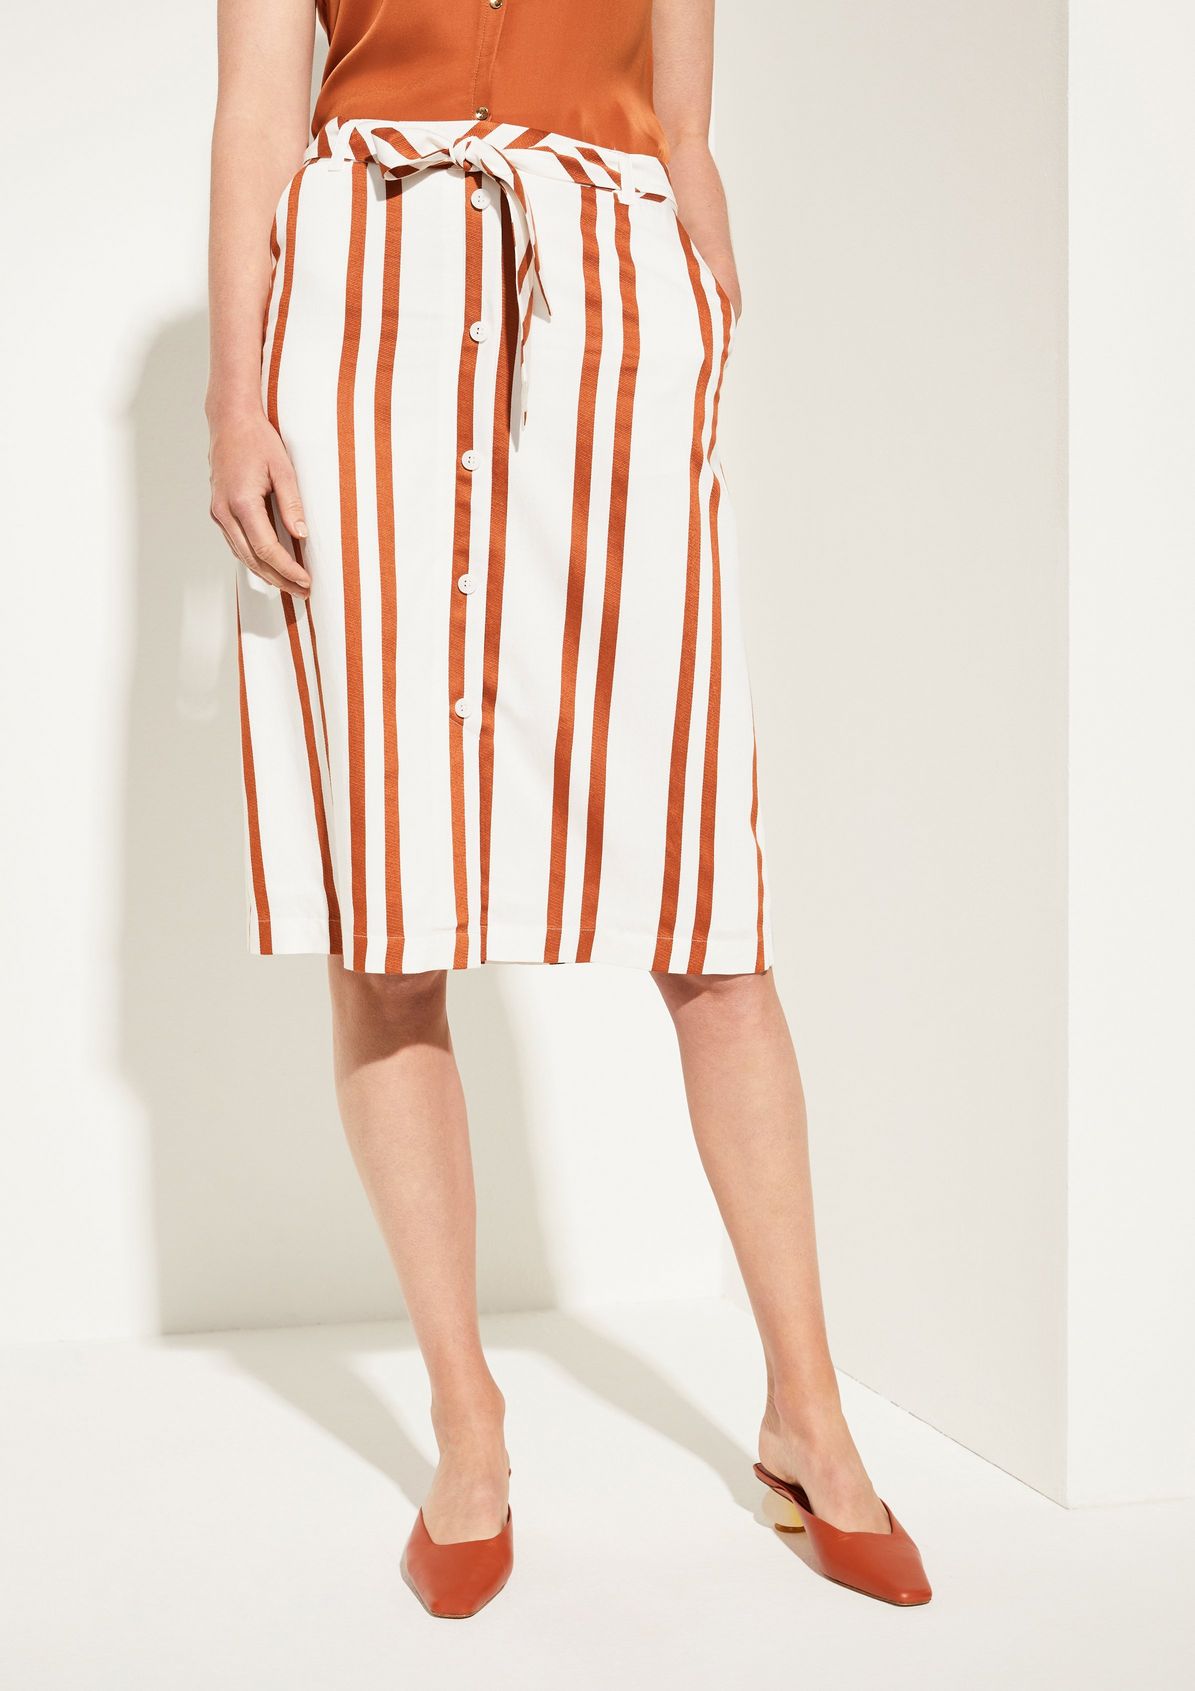 Viscose skirt with a striped pattern from comma